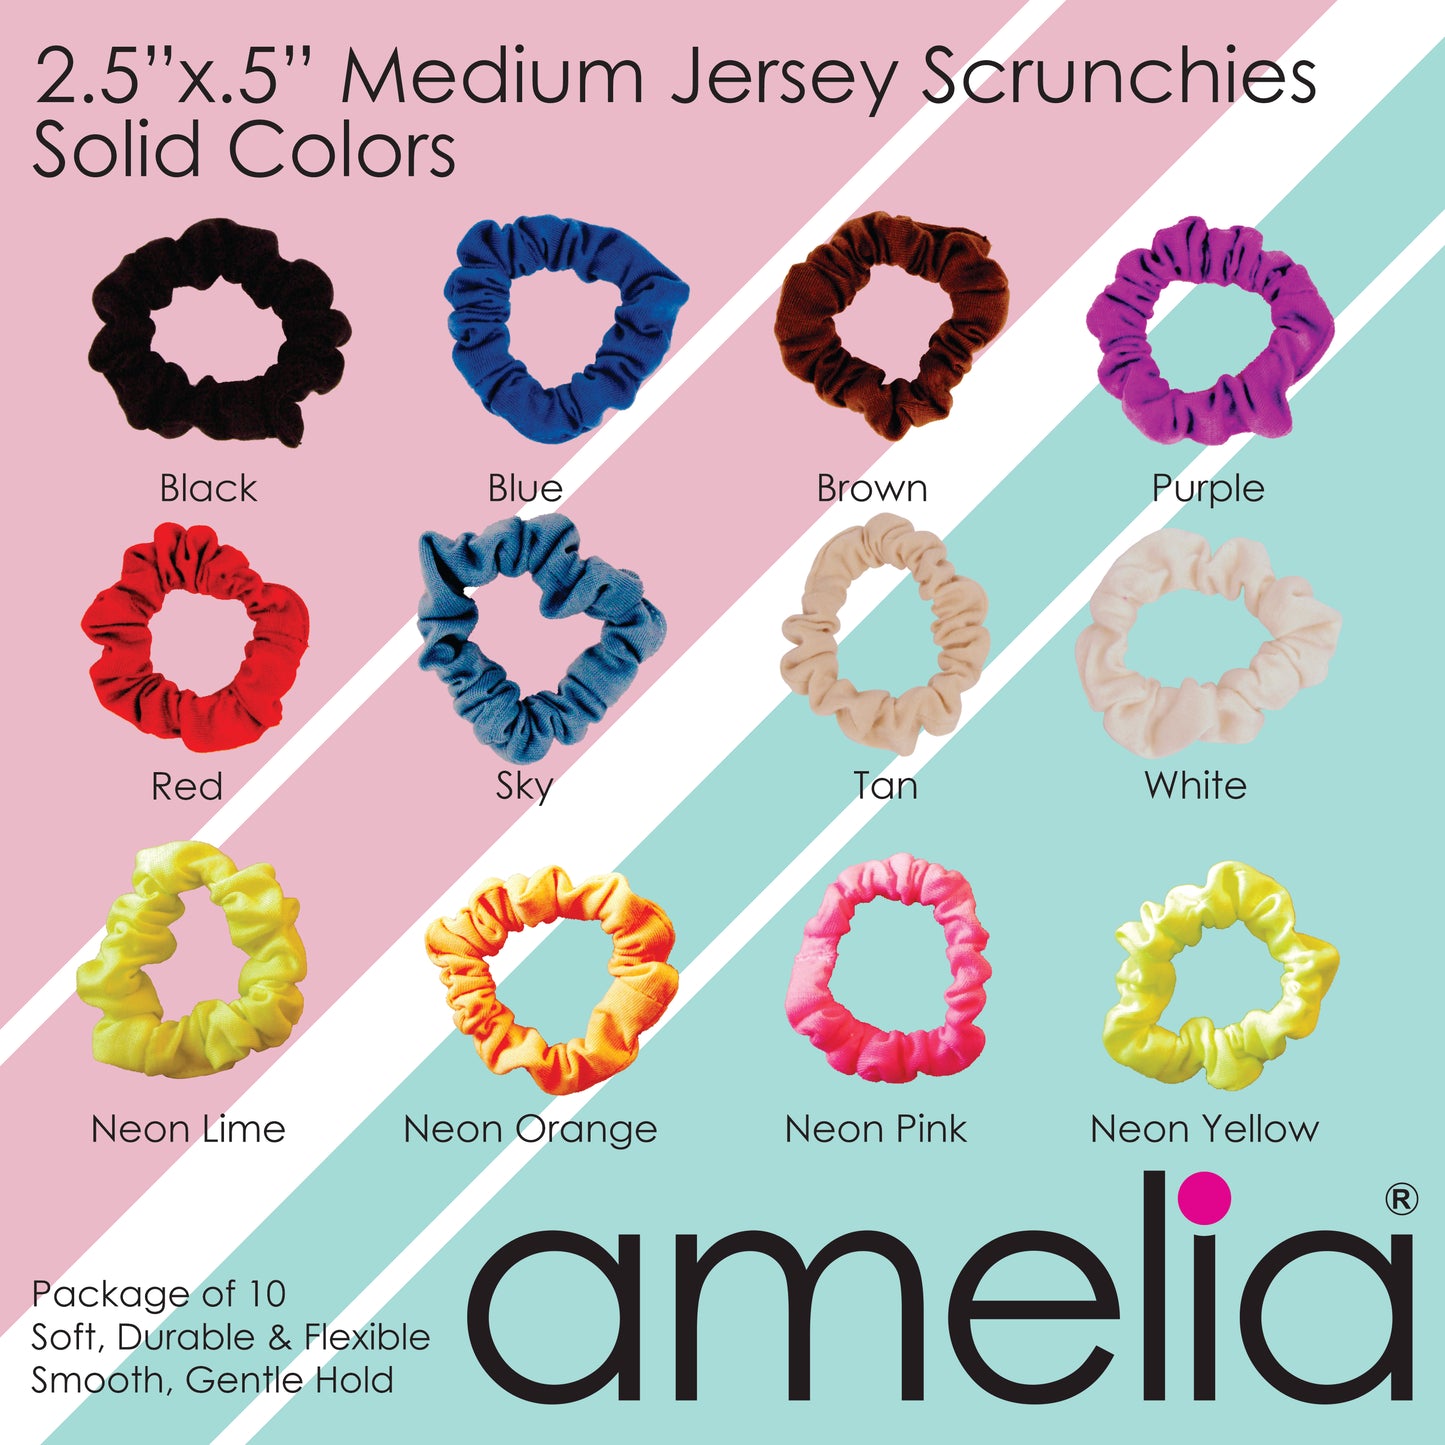 Amelia Beauty, Medium Neon Lime Jersey Scrunchies, 2.5in Diameter, Gentle on Hair, Strong Hold, No Snag, No Dents or Creases. 10 Pack